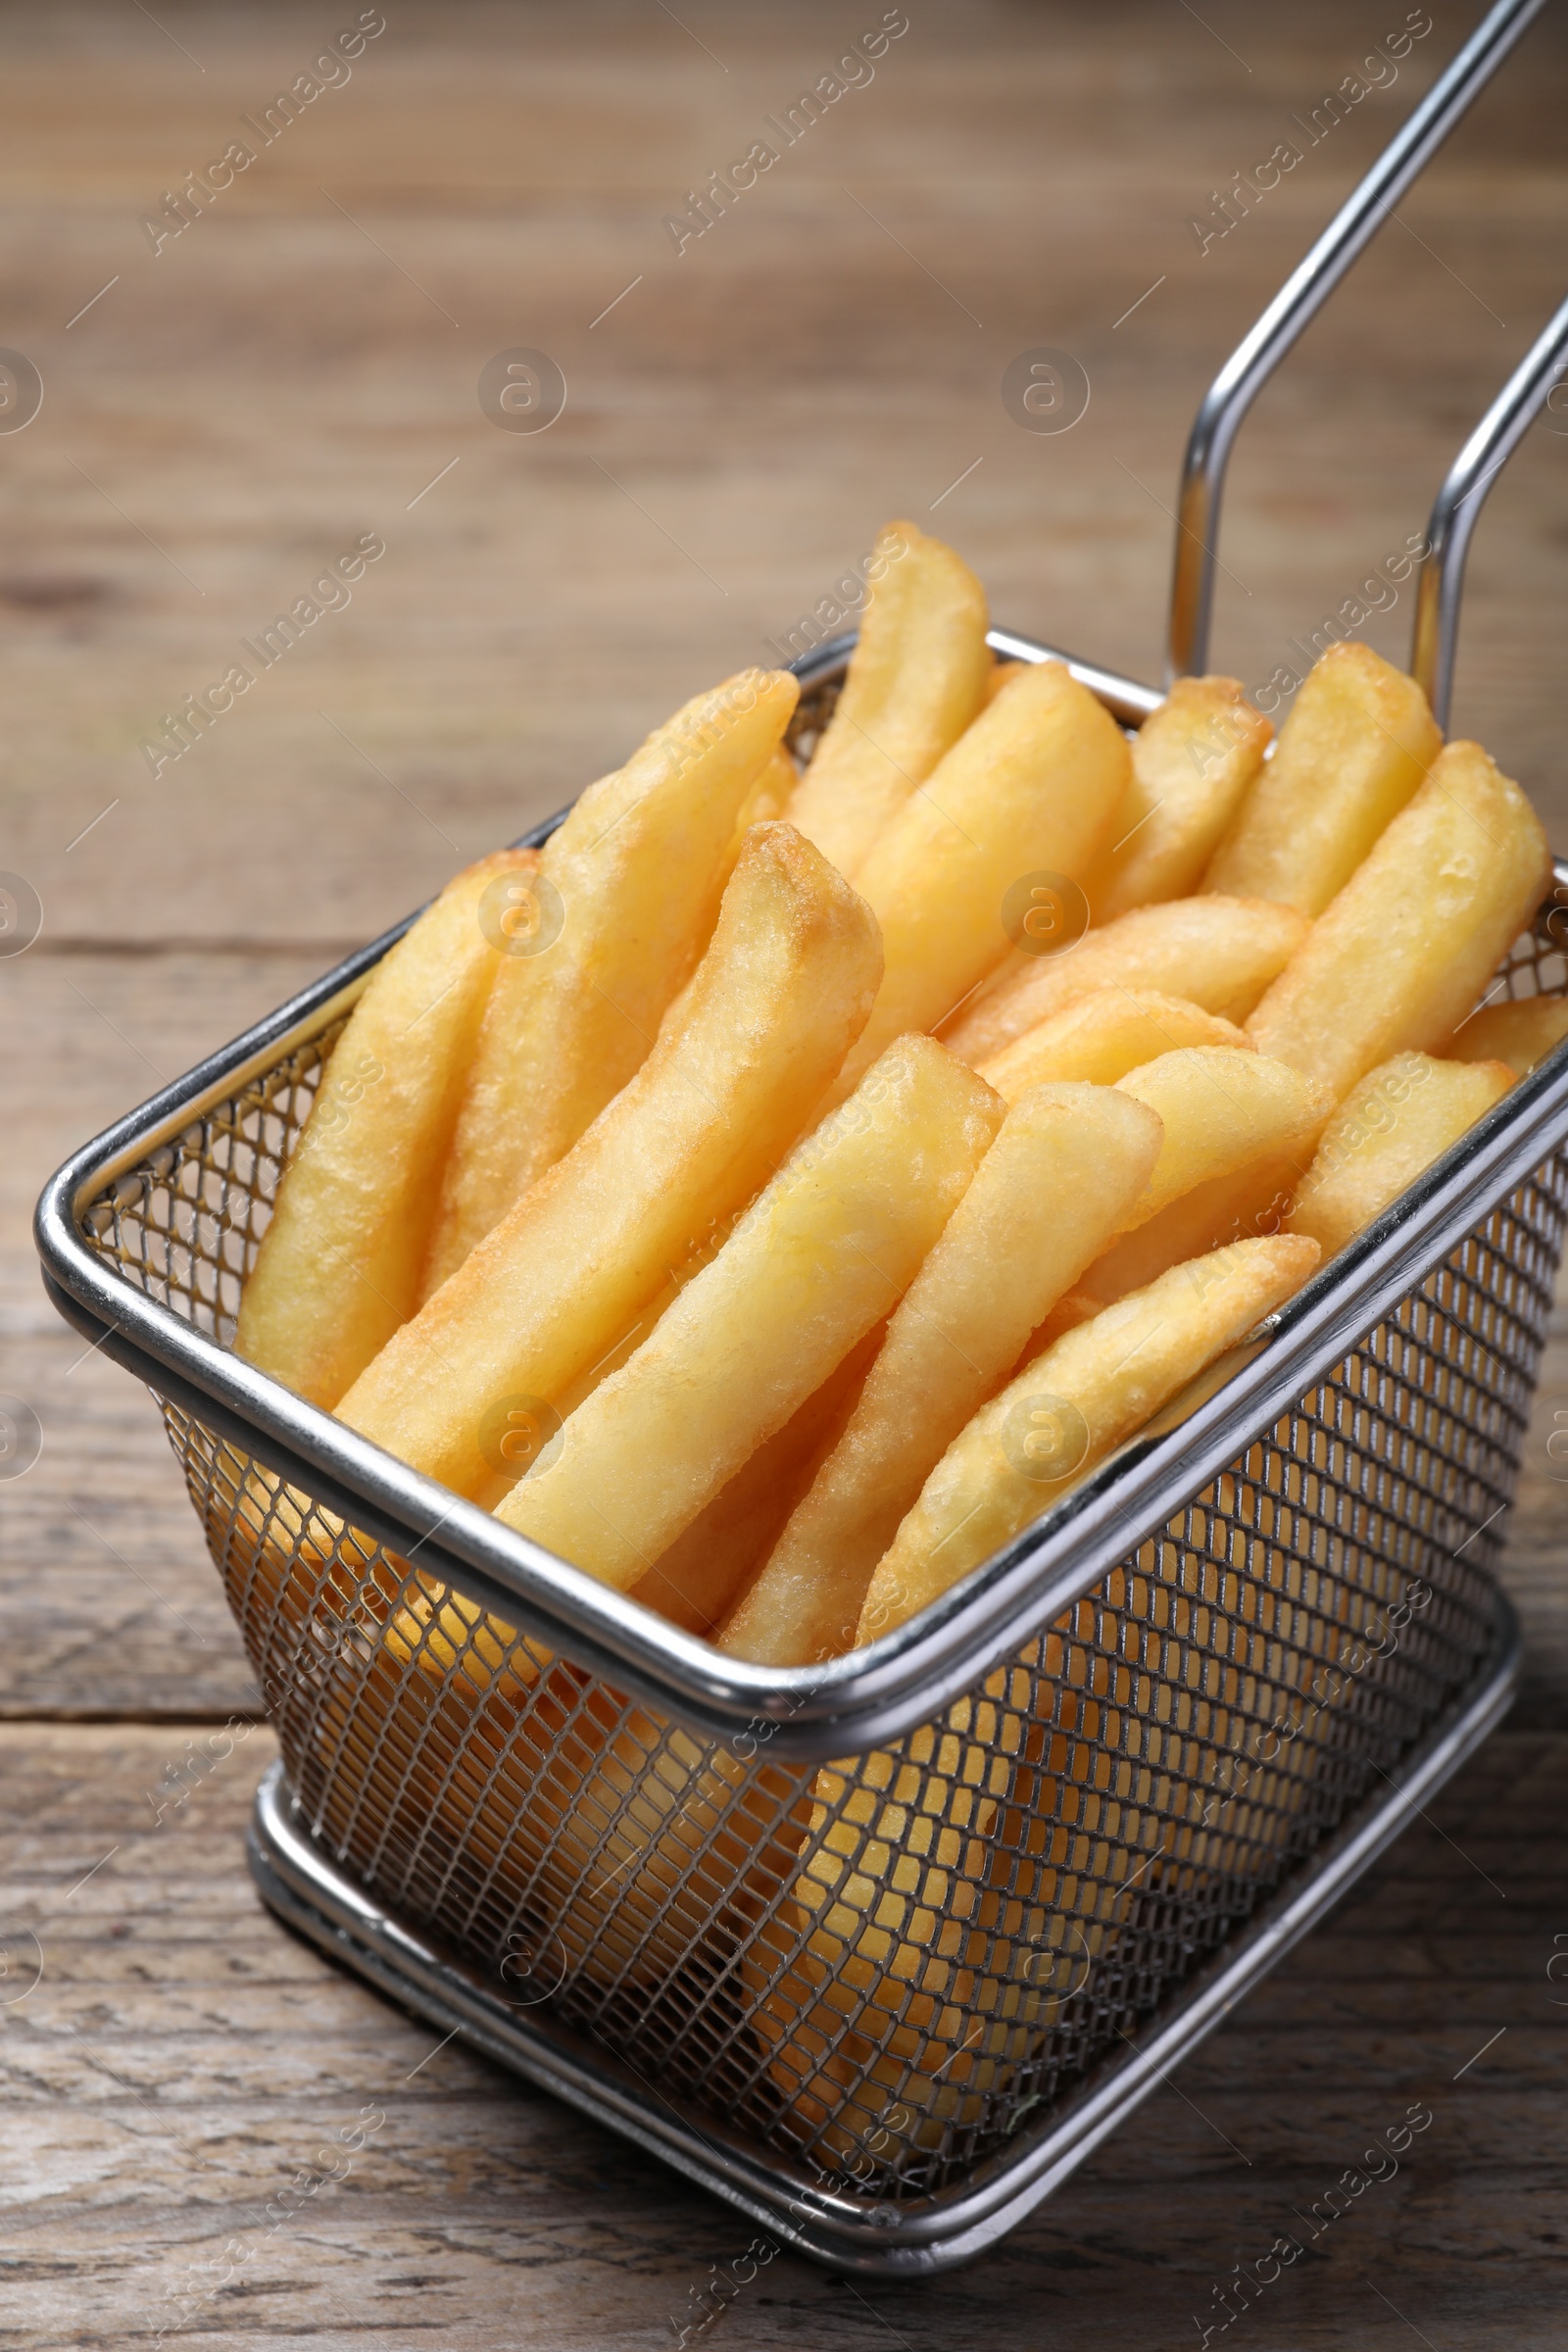 Photo of Tasty French fries in metal basket on wooden table, closeup